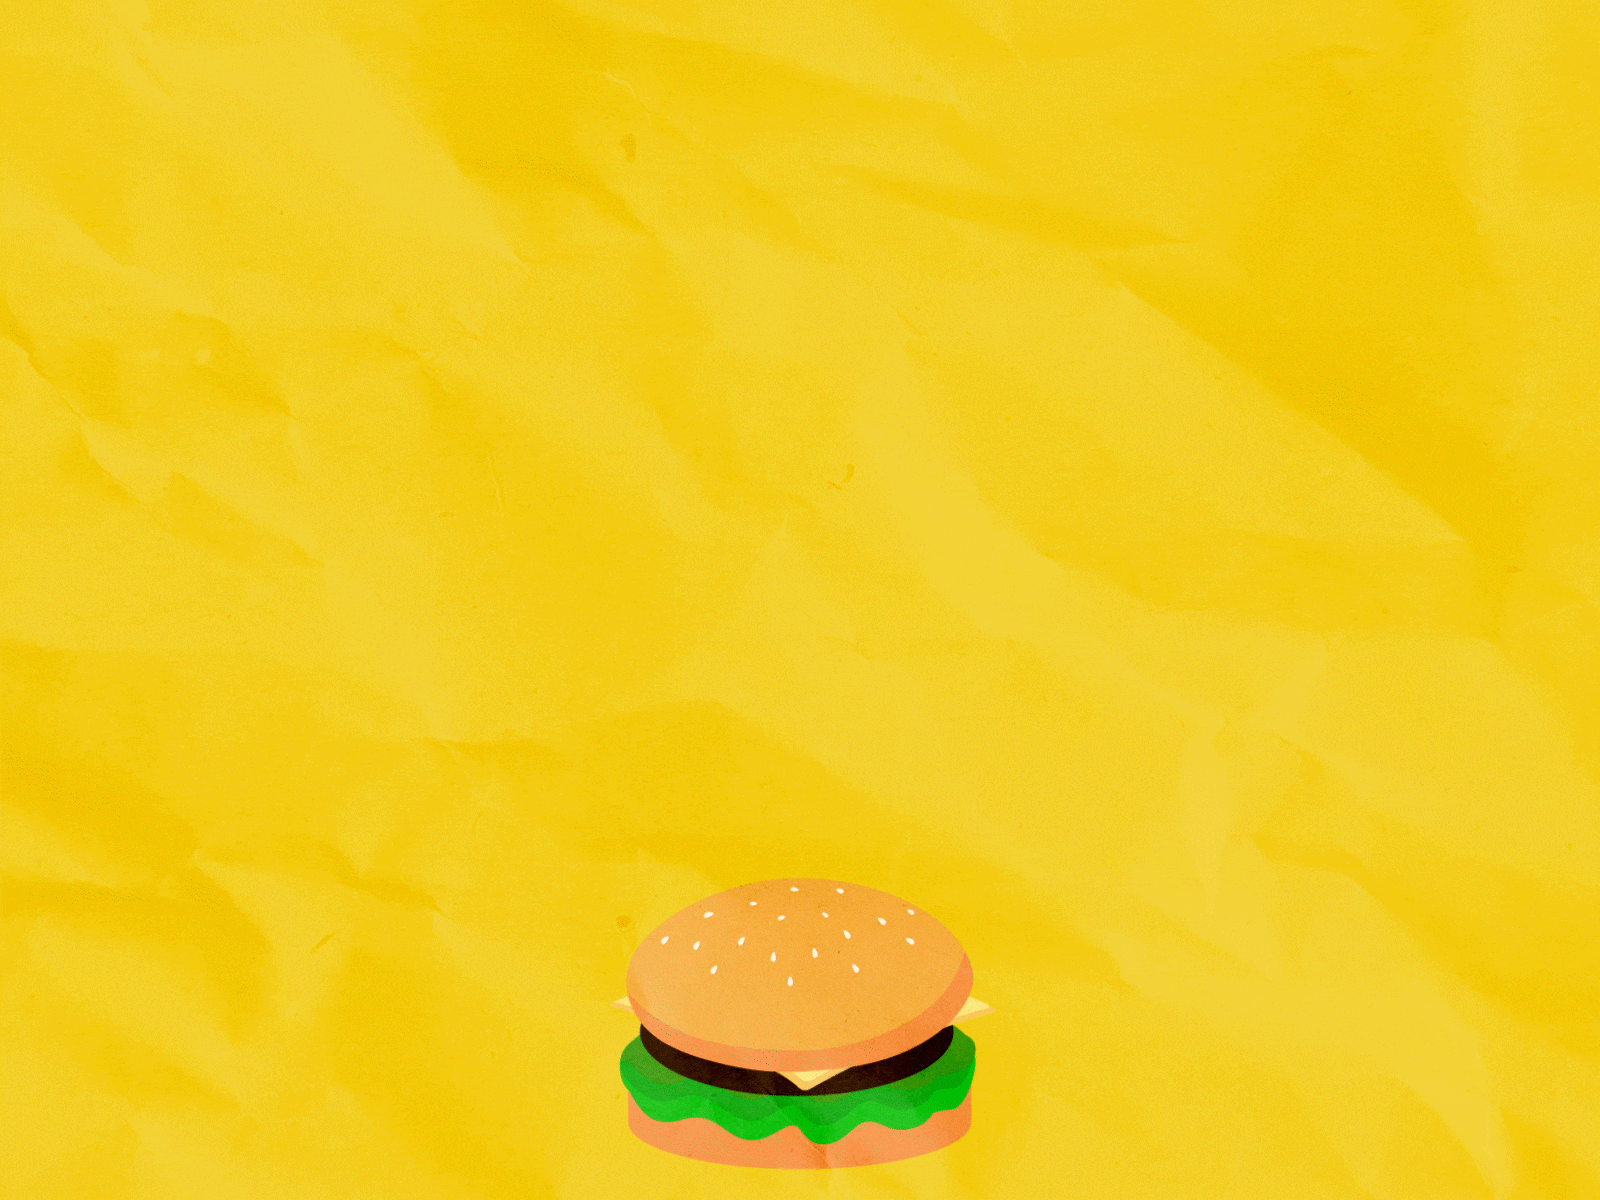 Burger #2 2d animation 2d illustration aftereffects animated gif animation animation after effects burger cartoon illustration food illustration gif animation